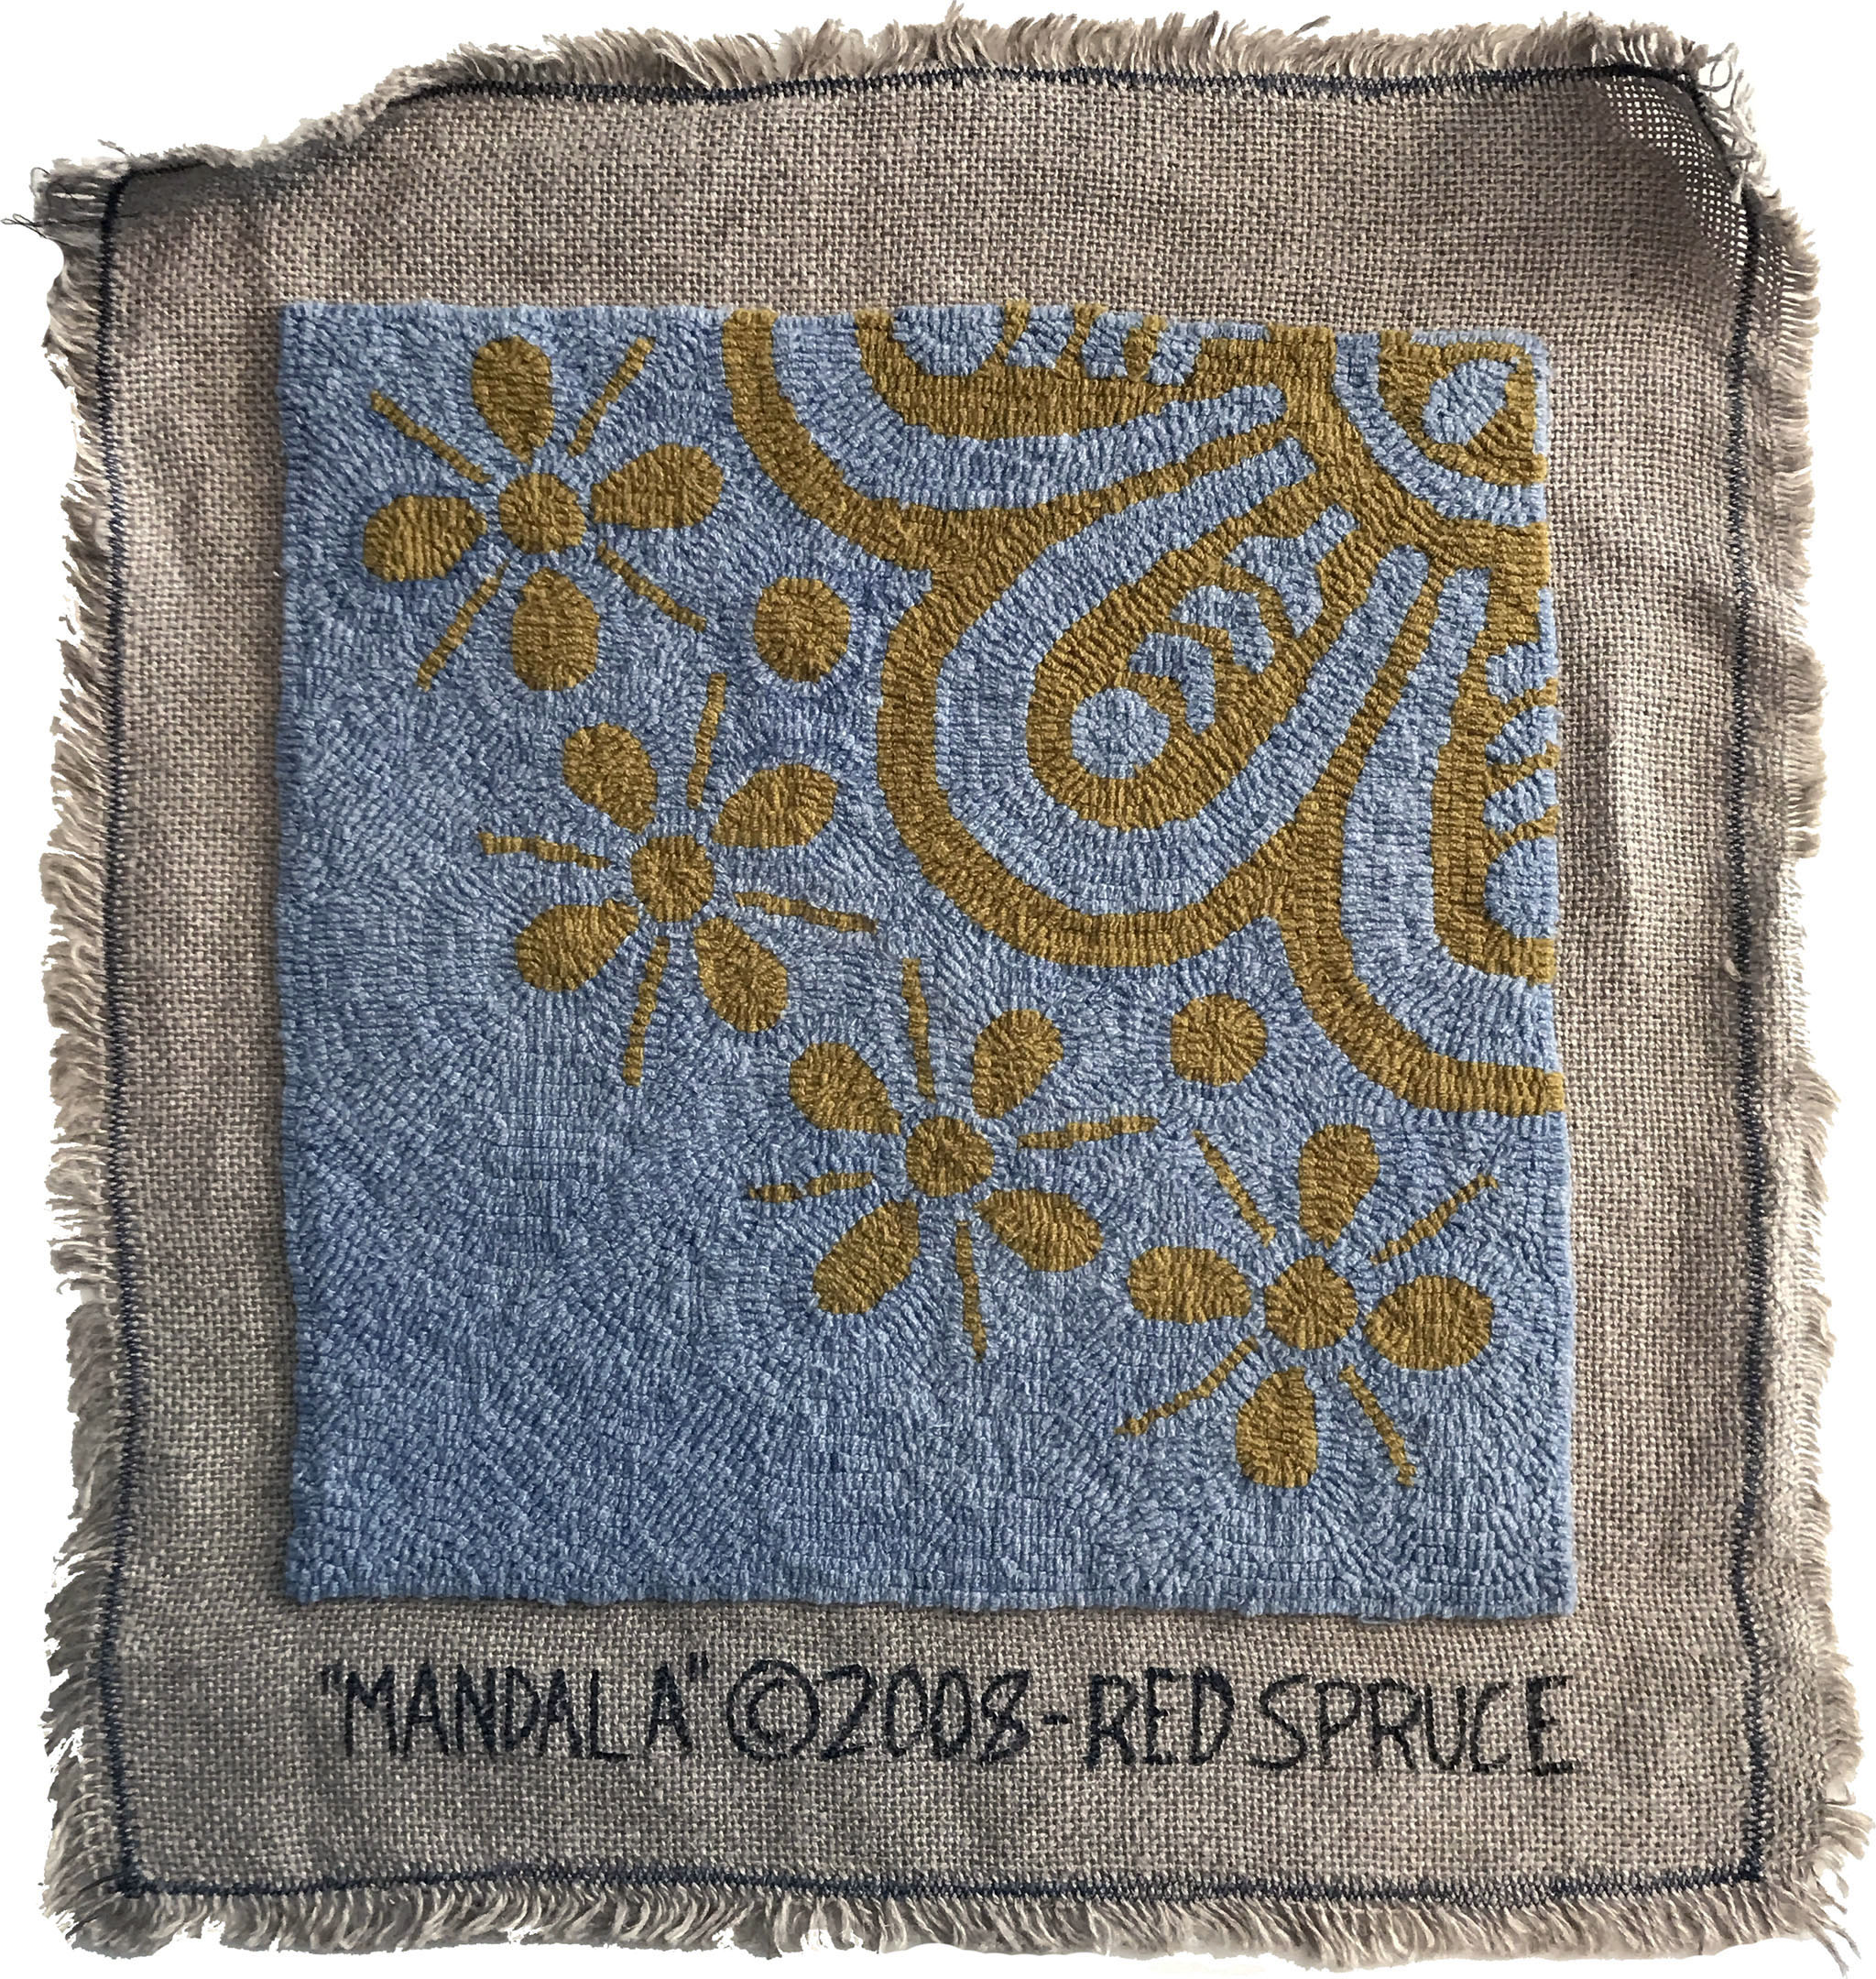 'Mandala' sample shown in the studio quality by Red Spruce. | Image: The Ruggist file.